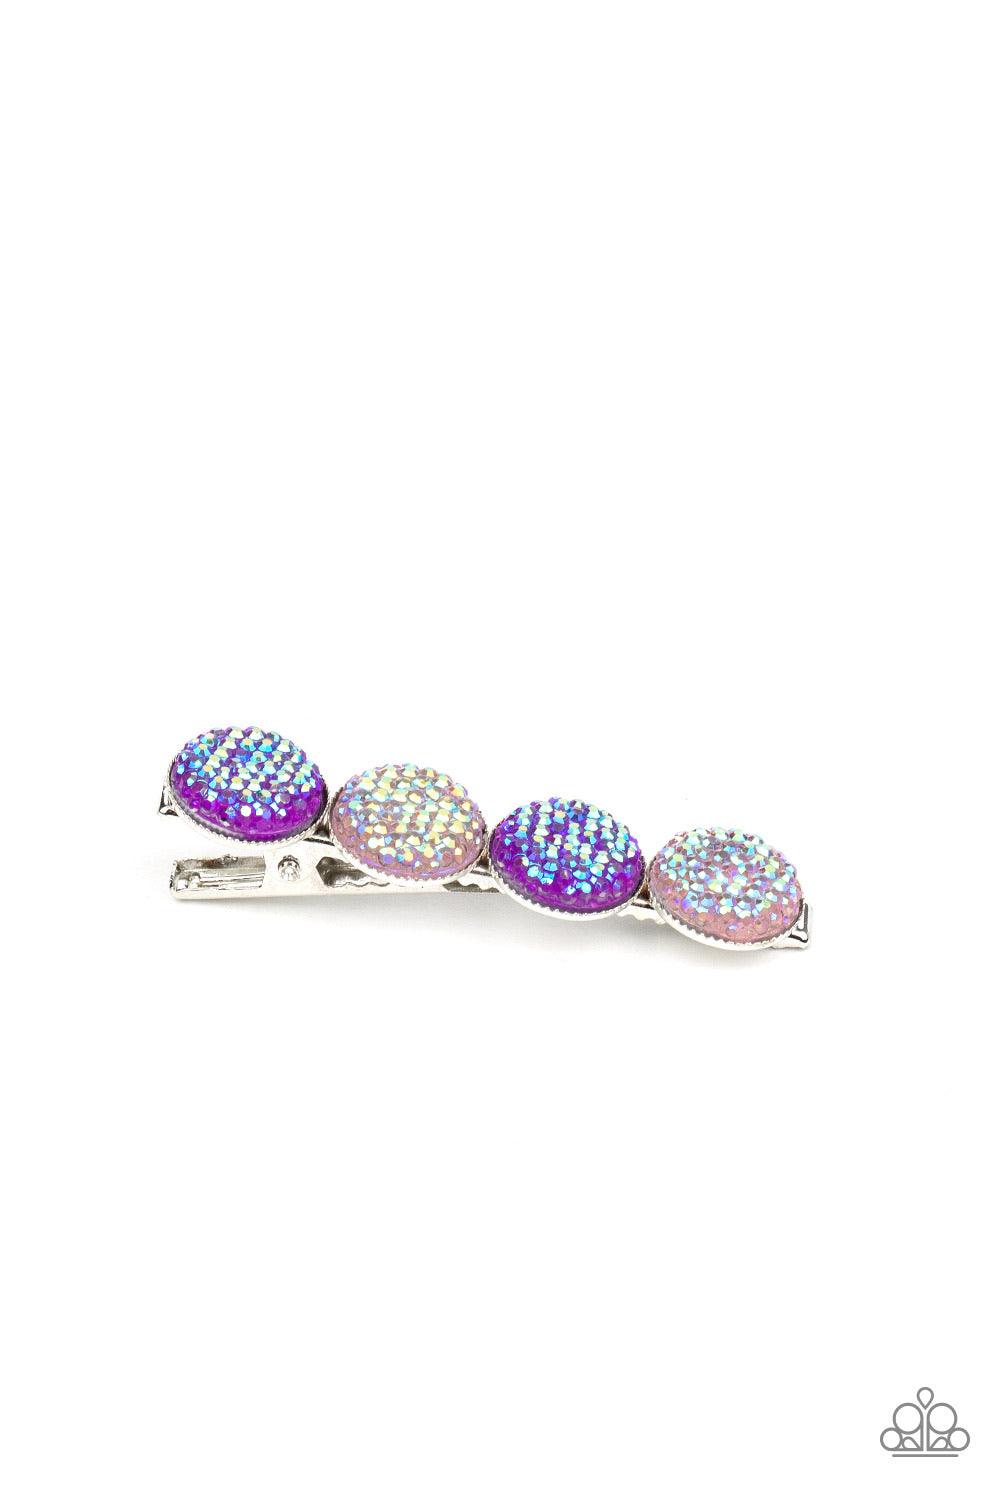 Paparazzi Accessories When GLEAMS Come True - Purple Featuring an iridescent shimmer, pink and purple rhinestone dotted gems are encrusted across the front of a shiny silver bar for a colorfully bubbly look. Features a standard hair clip on the back. Sold